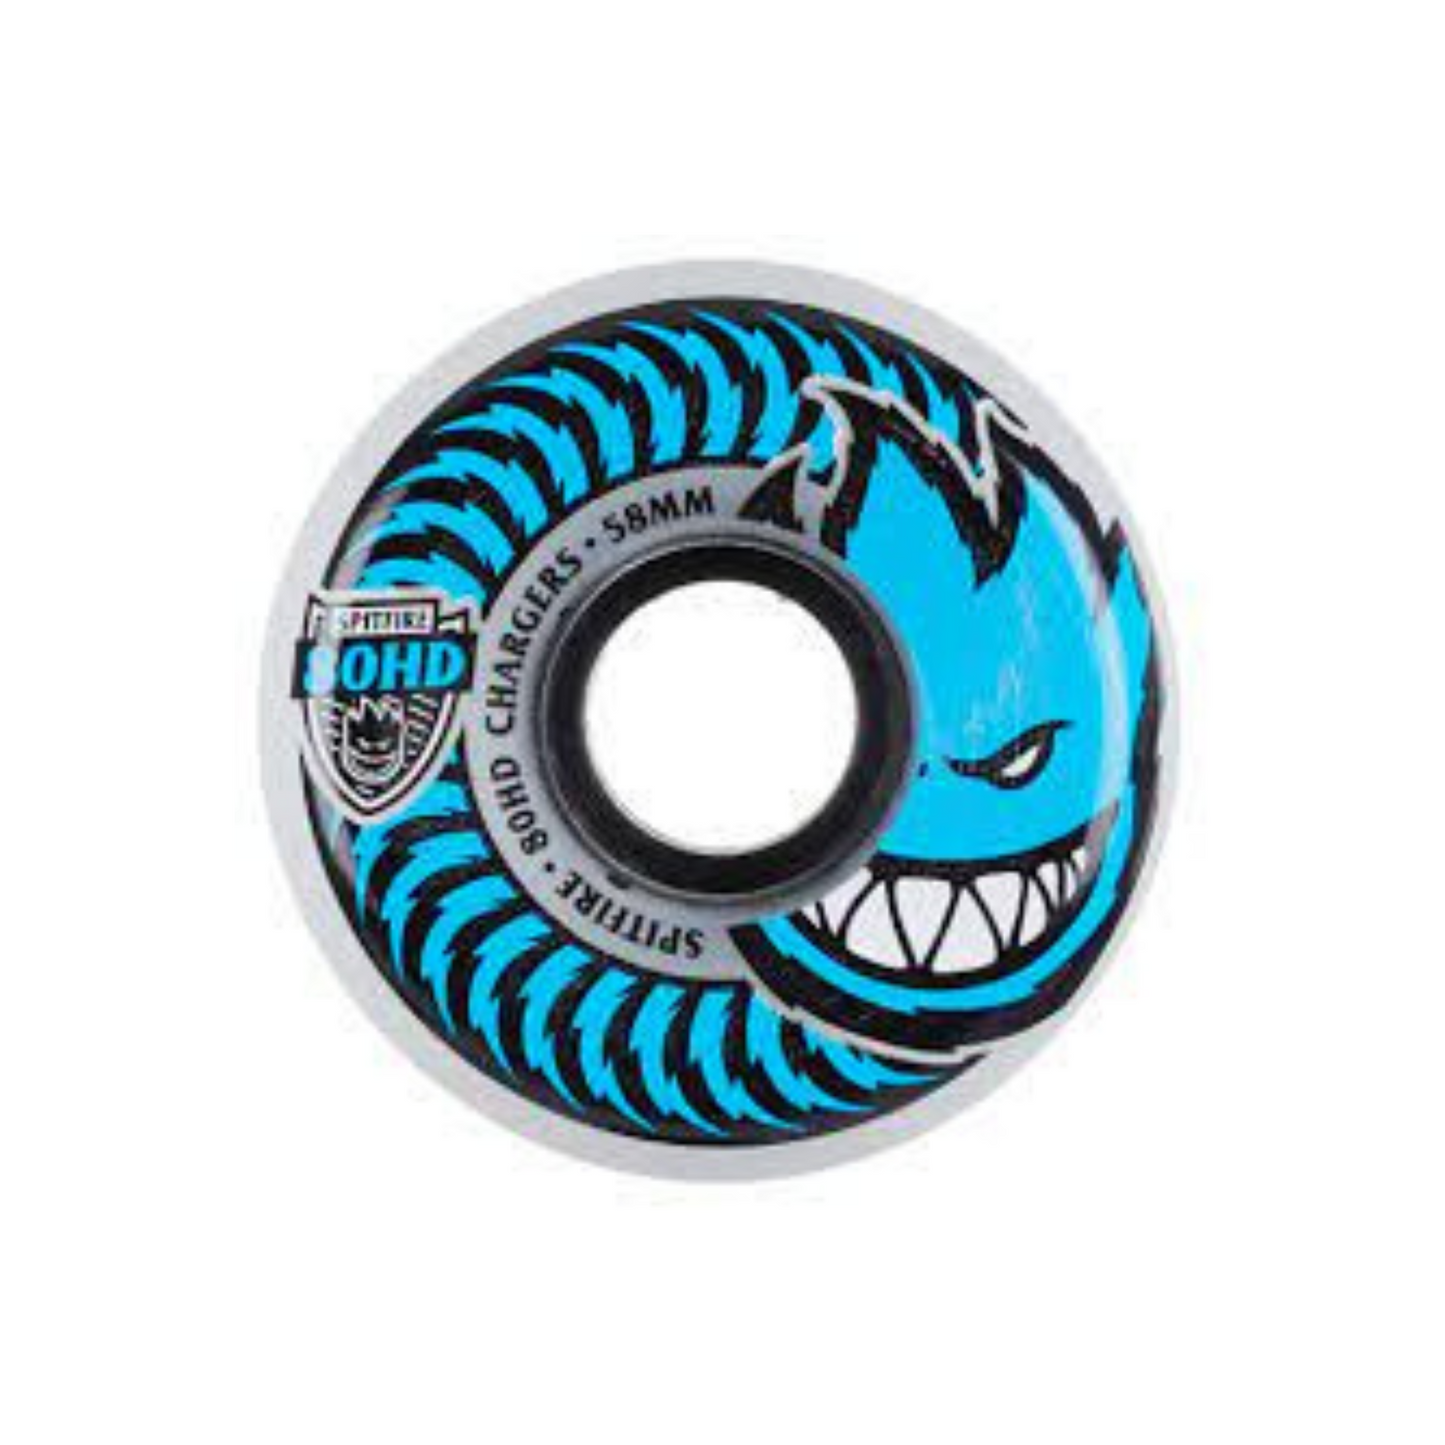 Spitfire Conical Full 58mm 80a